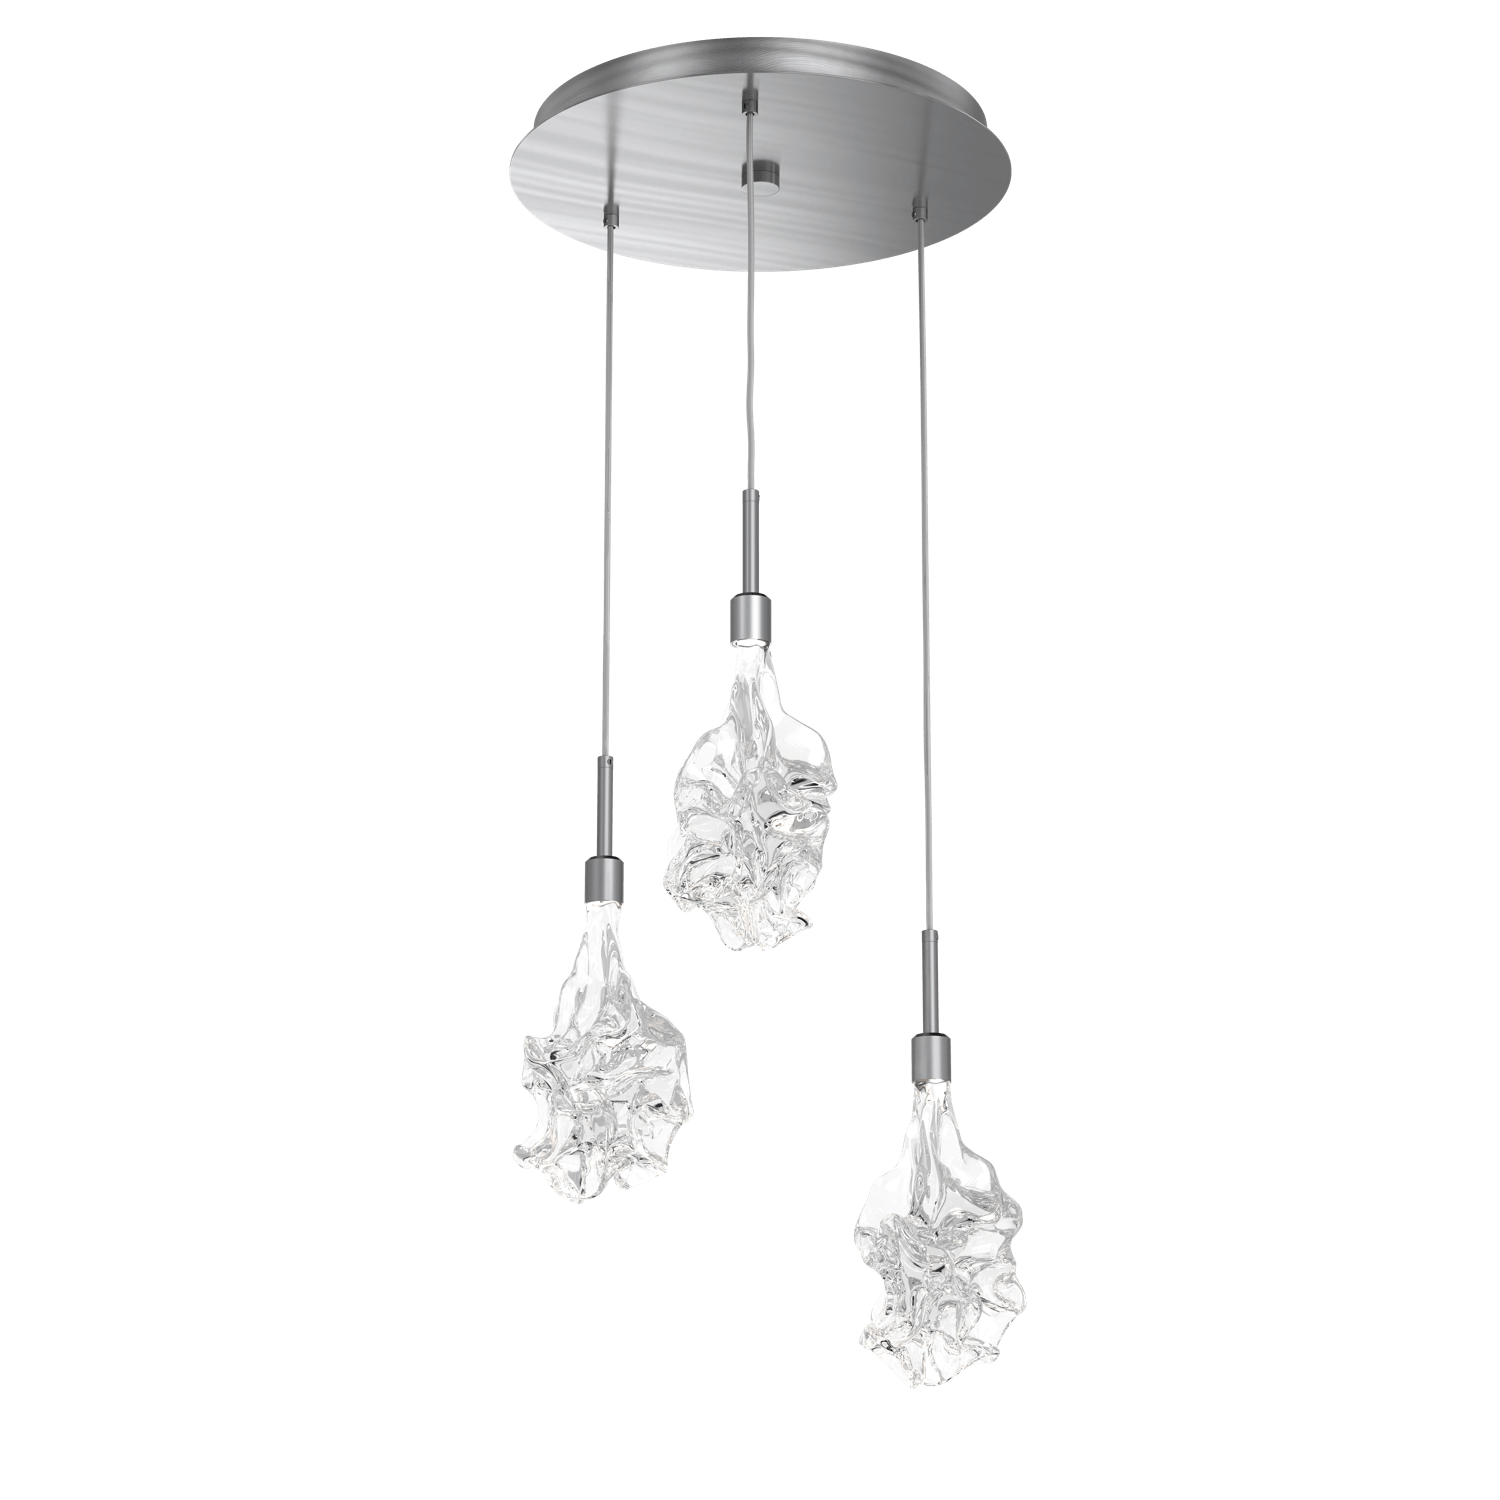 CHB0059-03-GM-Hammerton-Studio-Blossom-3-light-round-pendant-chandelier-with-gunmetal-finish-and-clear-handblown-crystal-glass-shades-and-LED-lamping